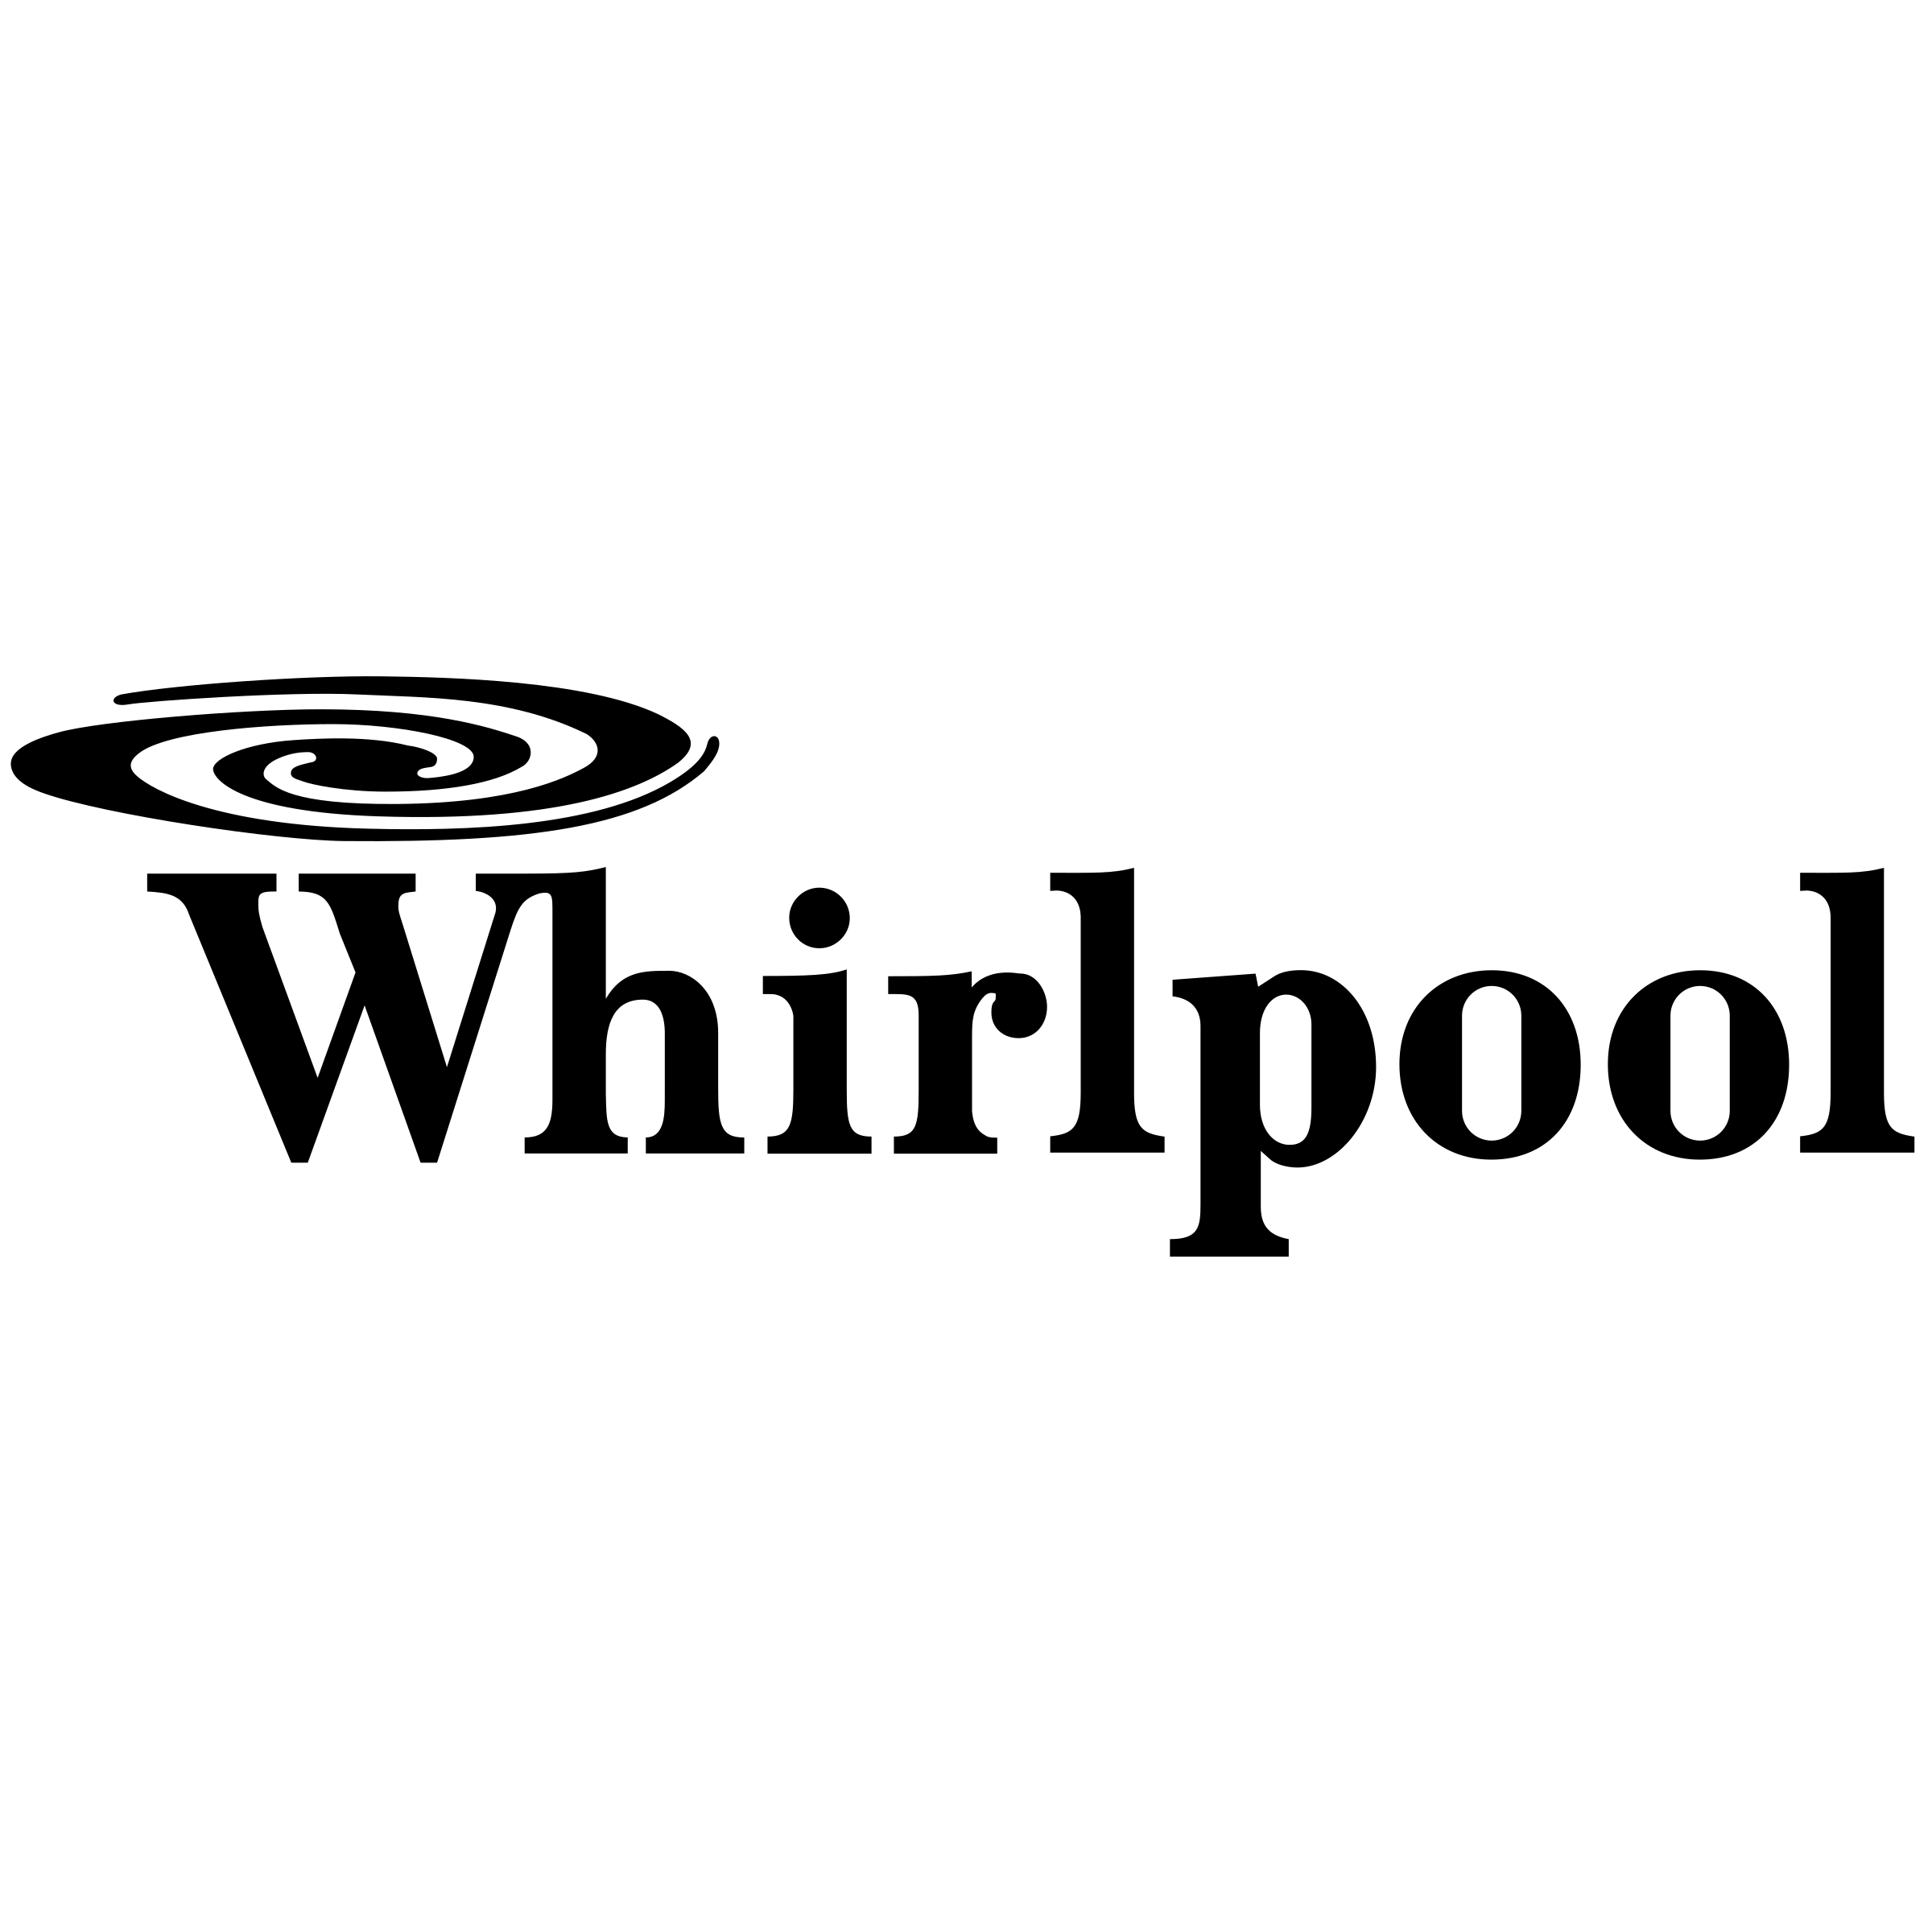 Whilpool Logo - Whirlpool Logo PNG Transparent & SVG Vector - Freebie Supply